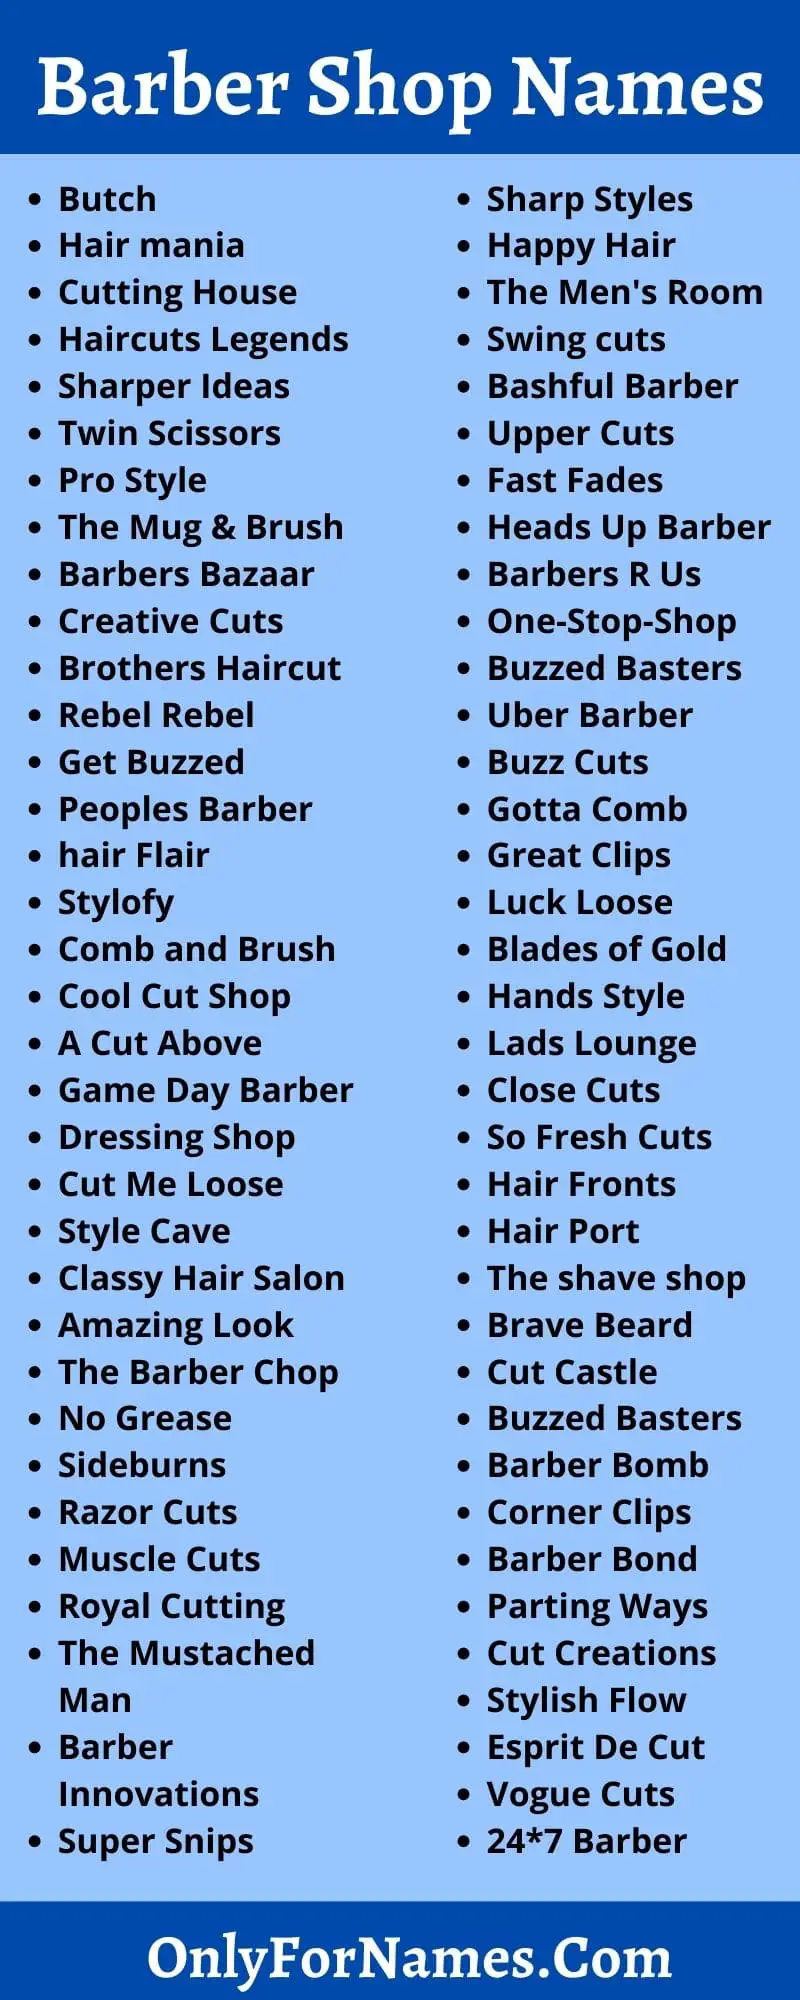 Barber Shop Names [2021] For Looking Cool, Good & Catchy